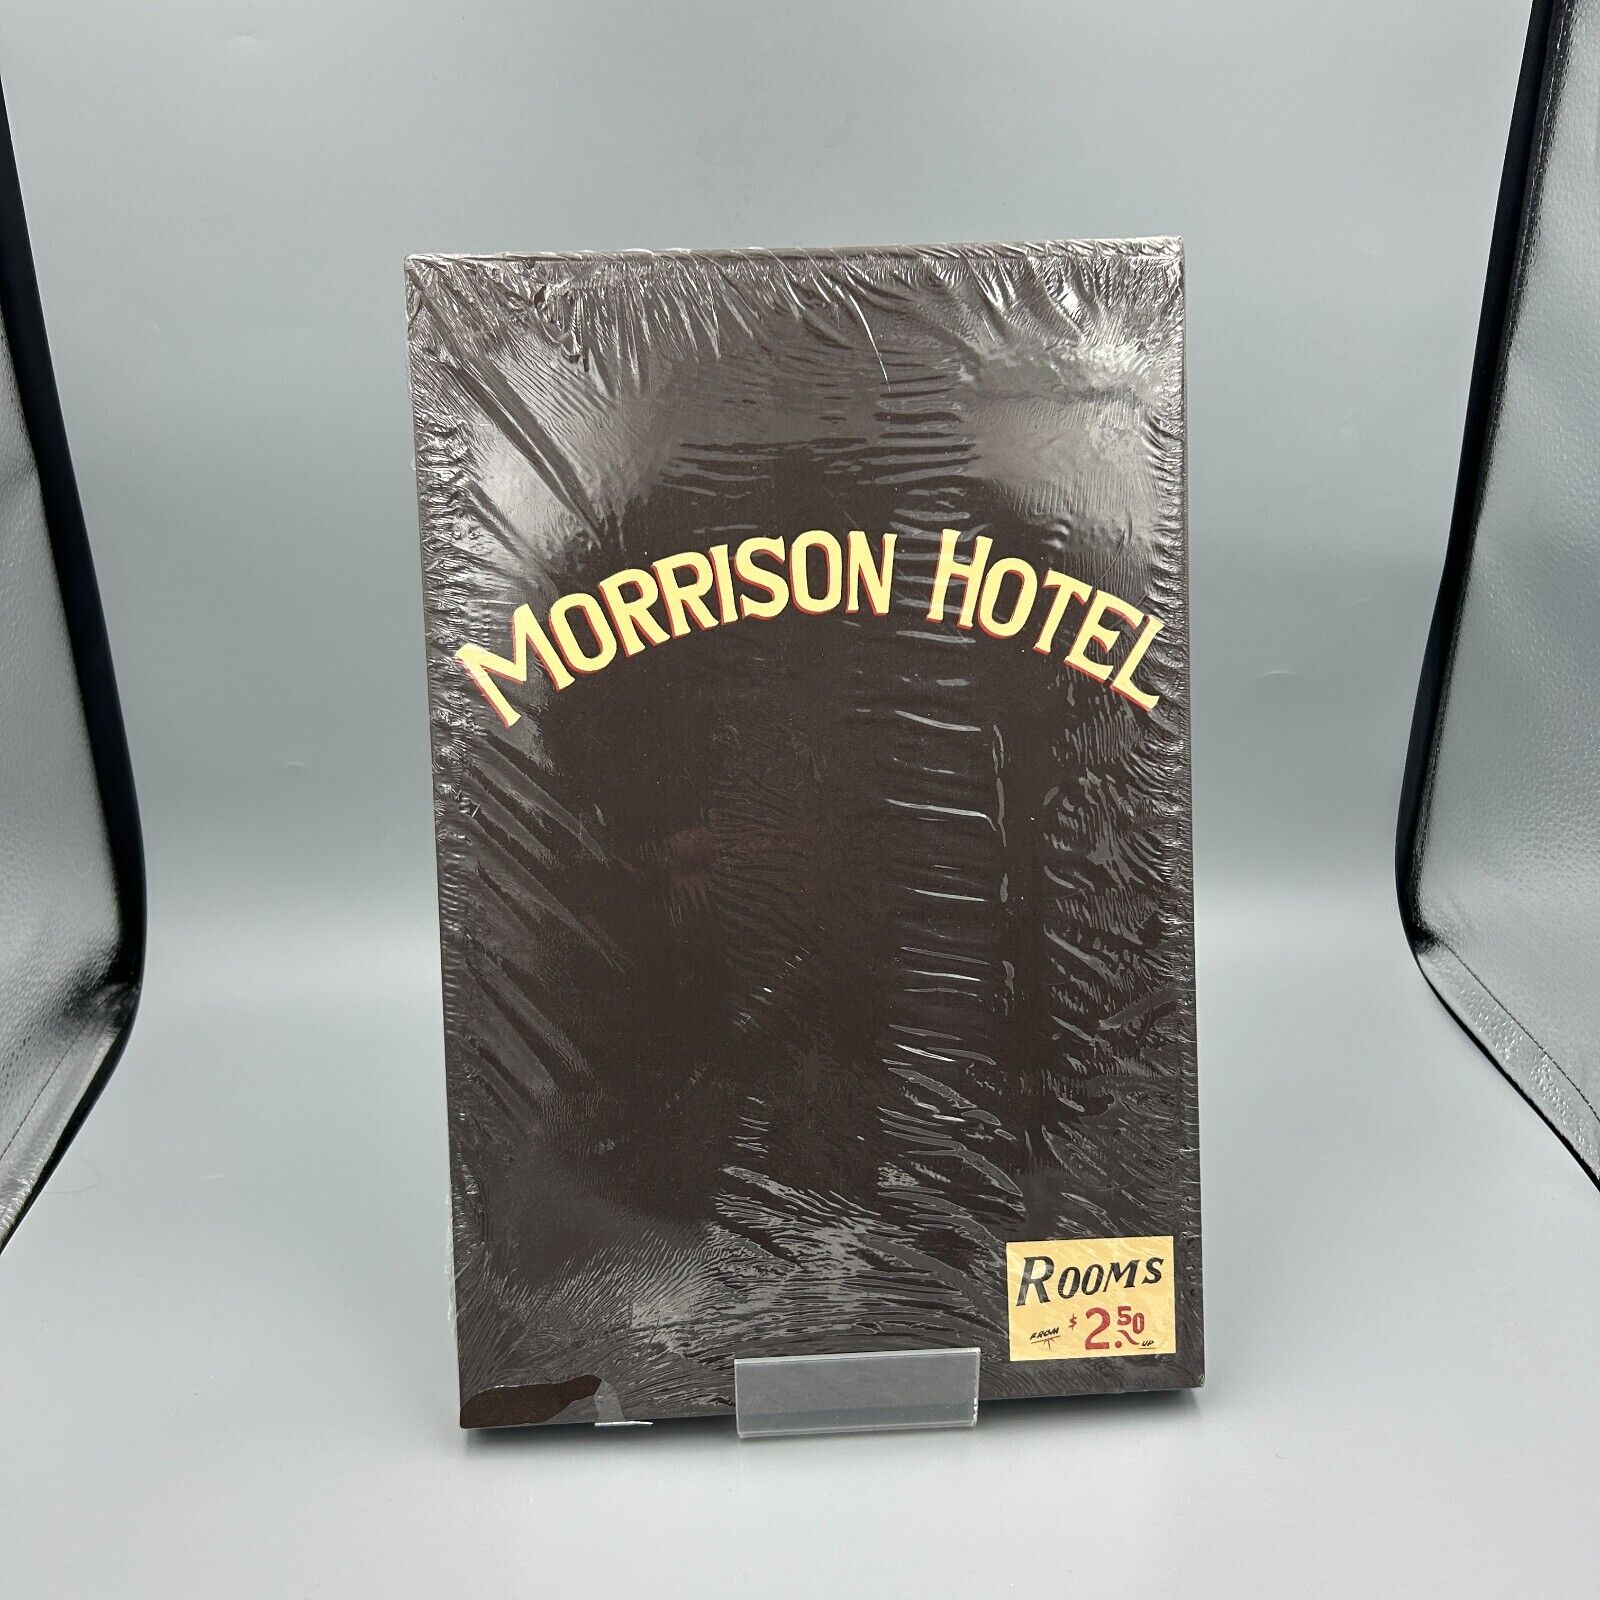 THE DOORS: MORRISON HOTEL - Graphic Novel - Oversized Deluxe Edition - NEW